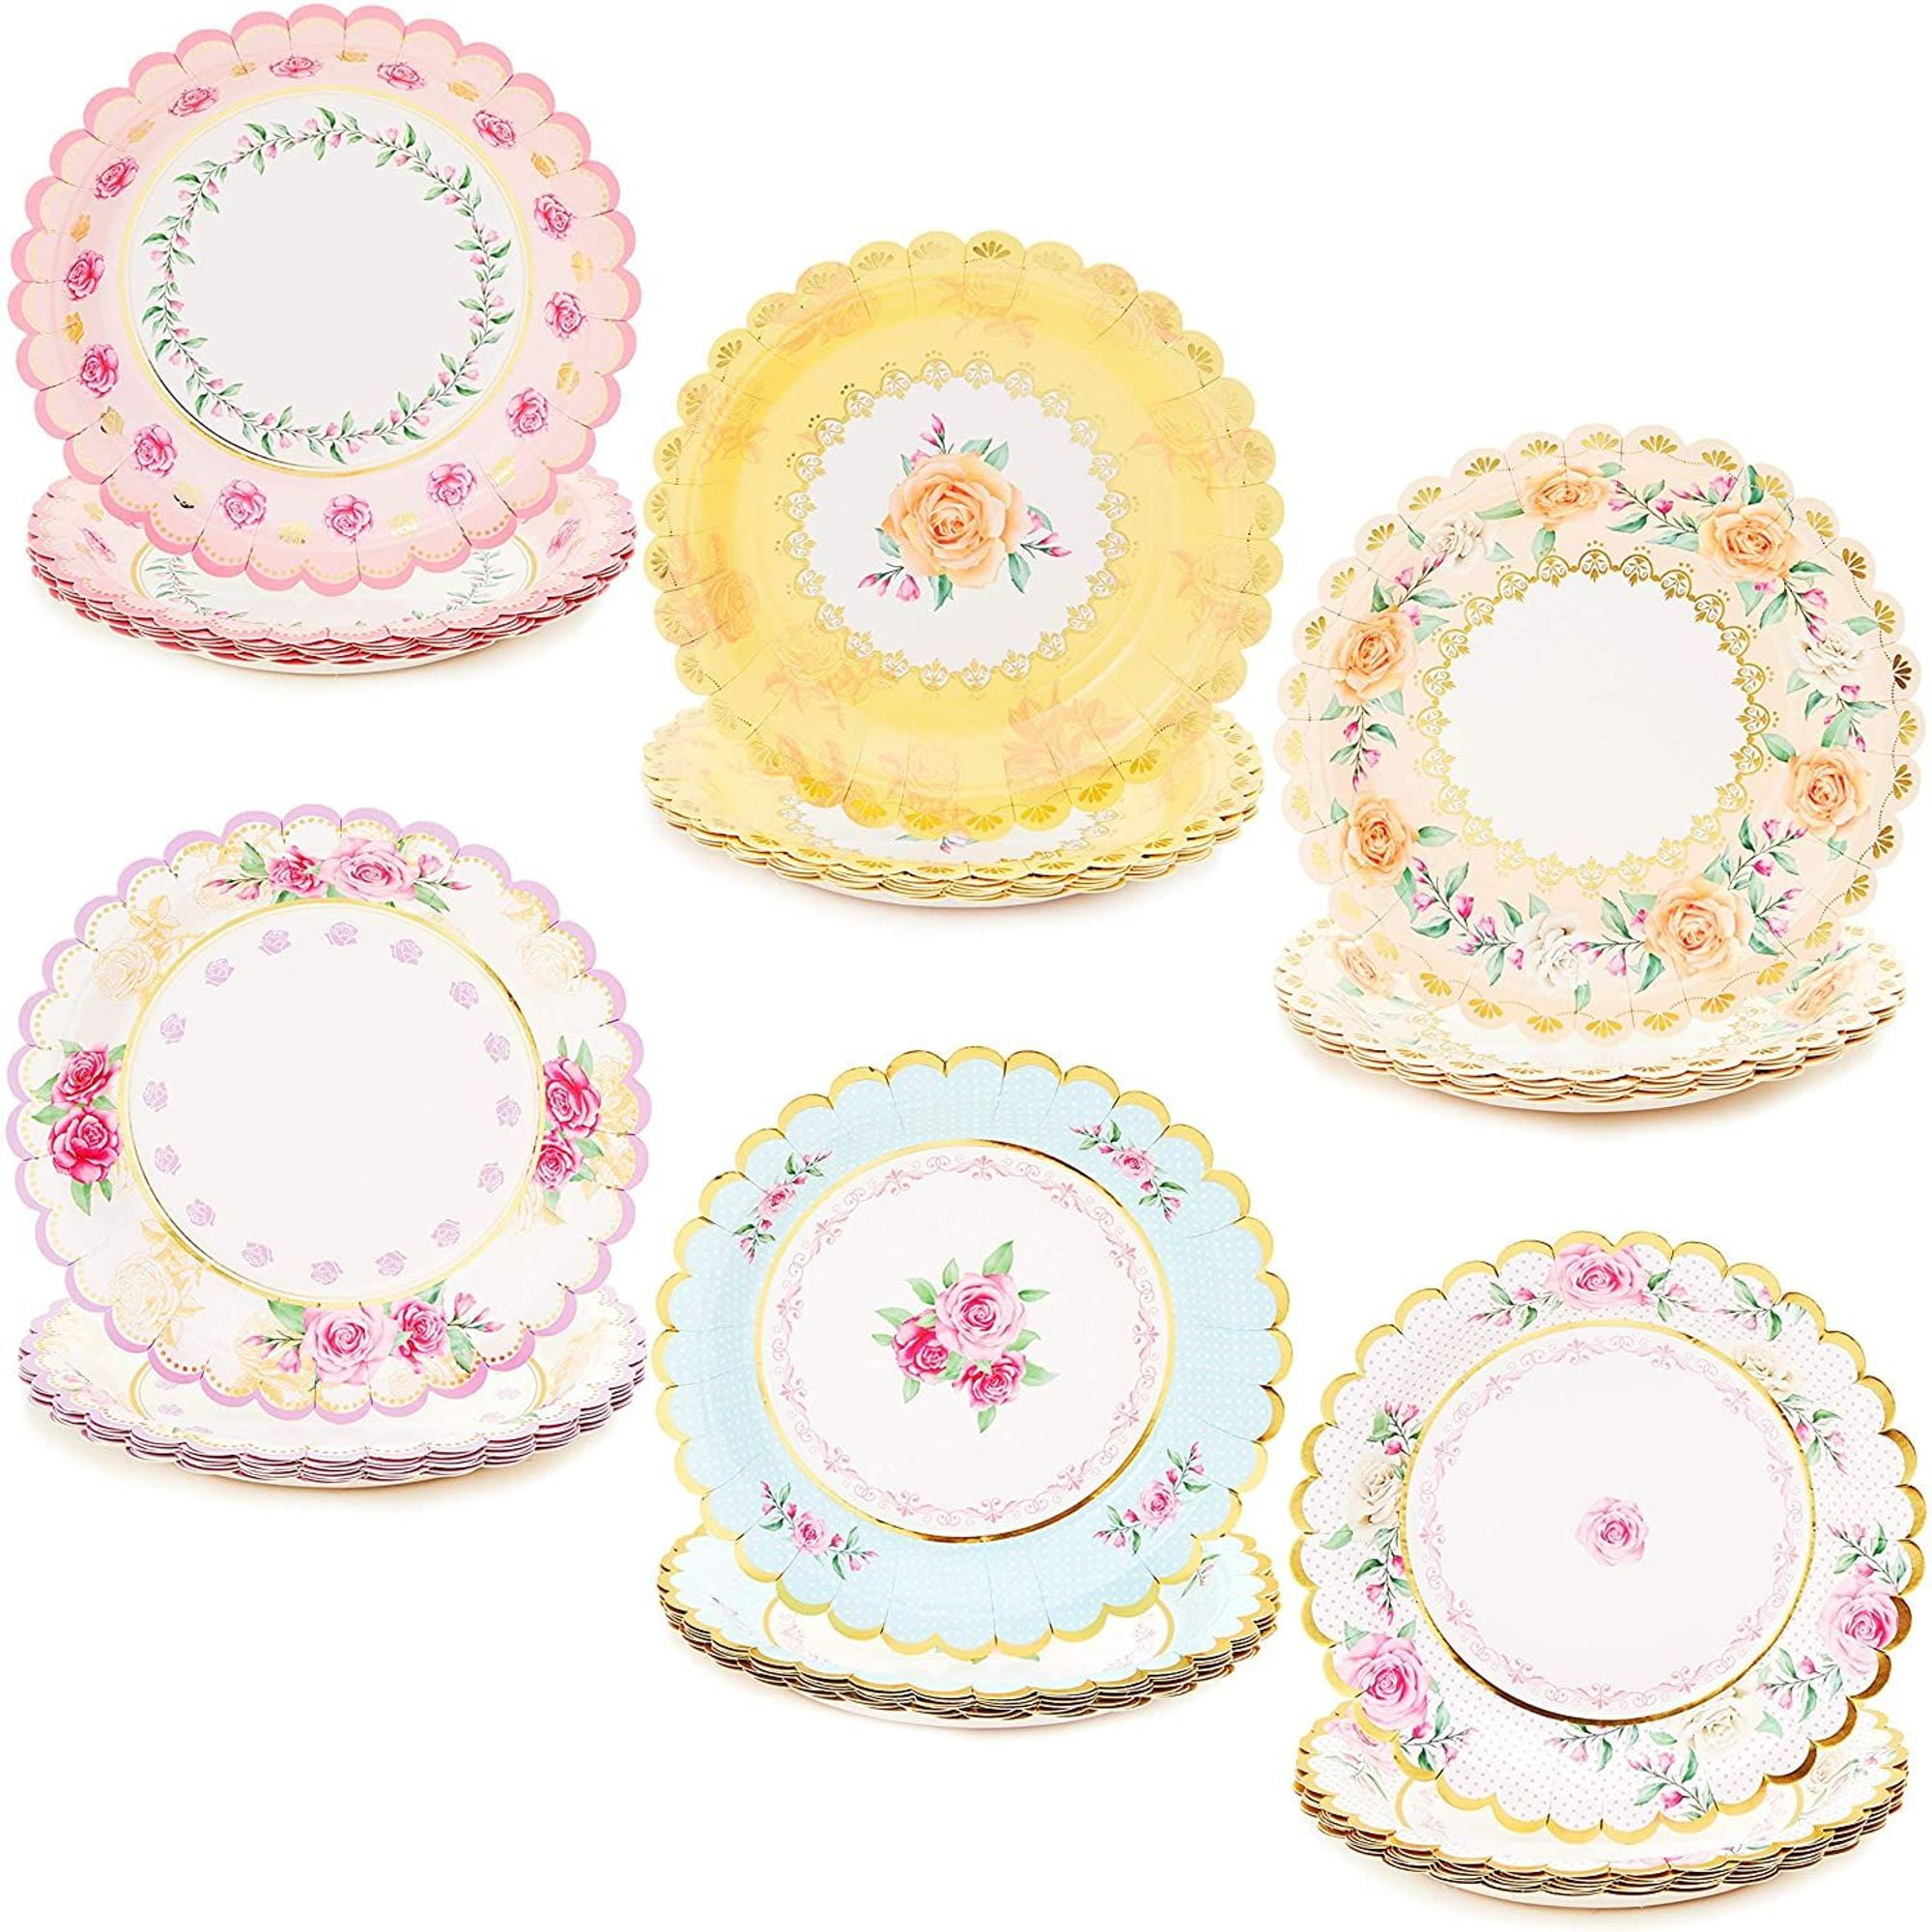 48-Pack Tea Party Supplies, Disposable Scalloped Paper Plates in